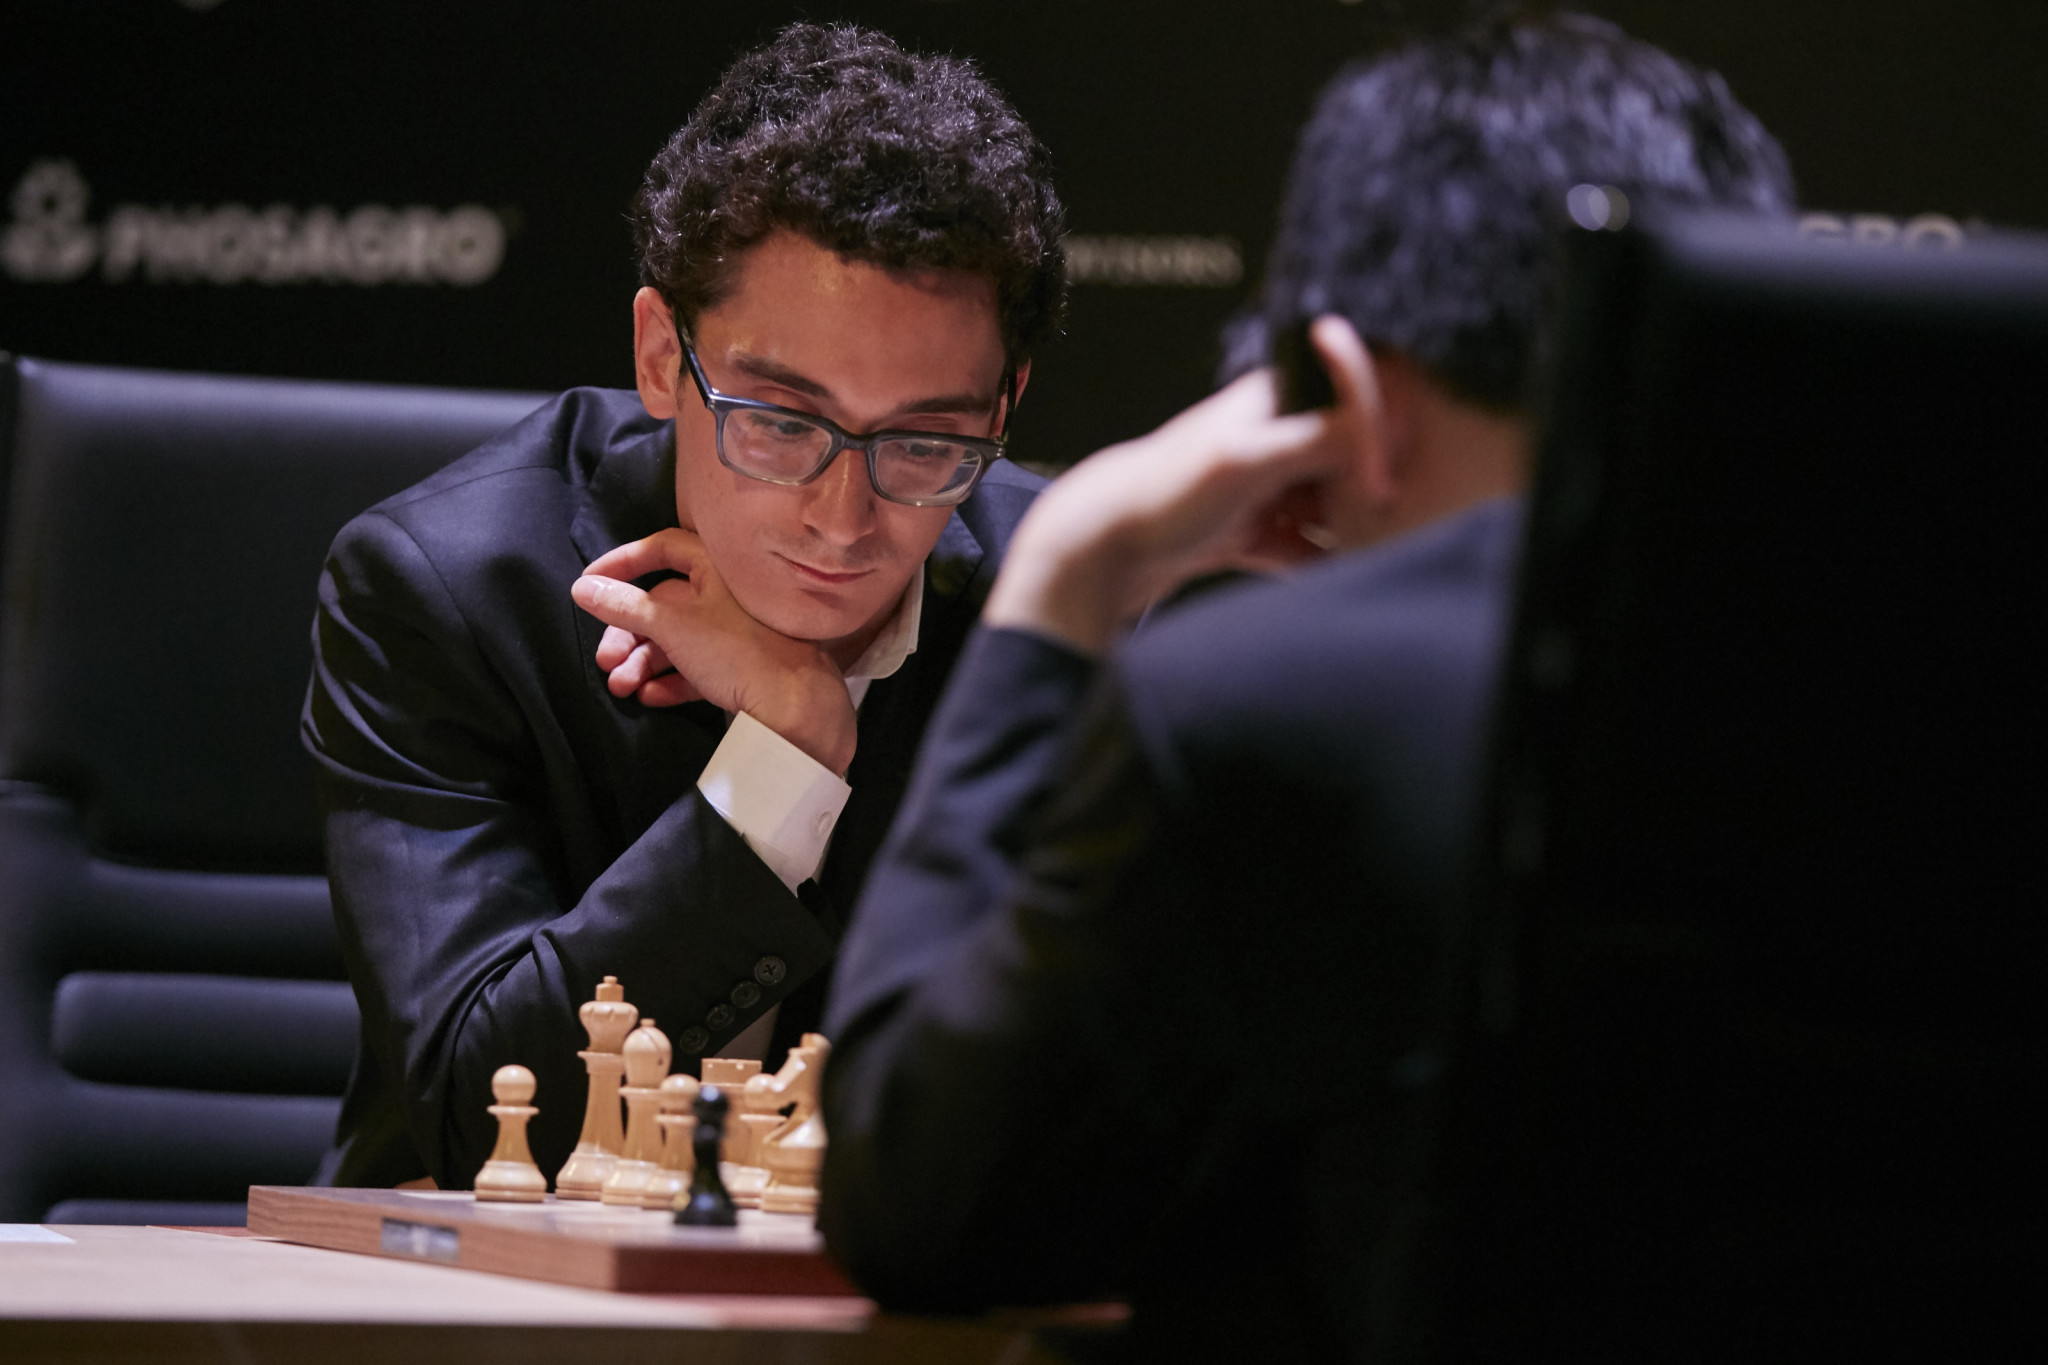 The United States' Fabiano Caruana has returned to the top of the World Chess Federation Candidates Tournament leaderboard ©Getty Images